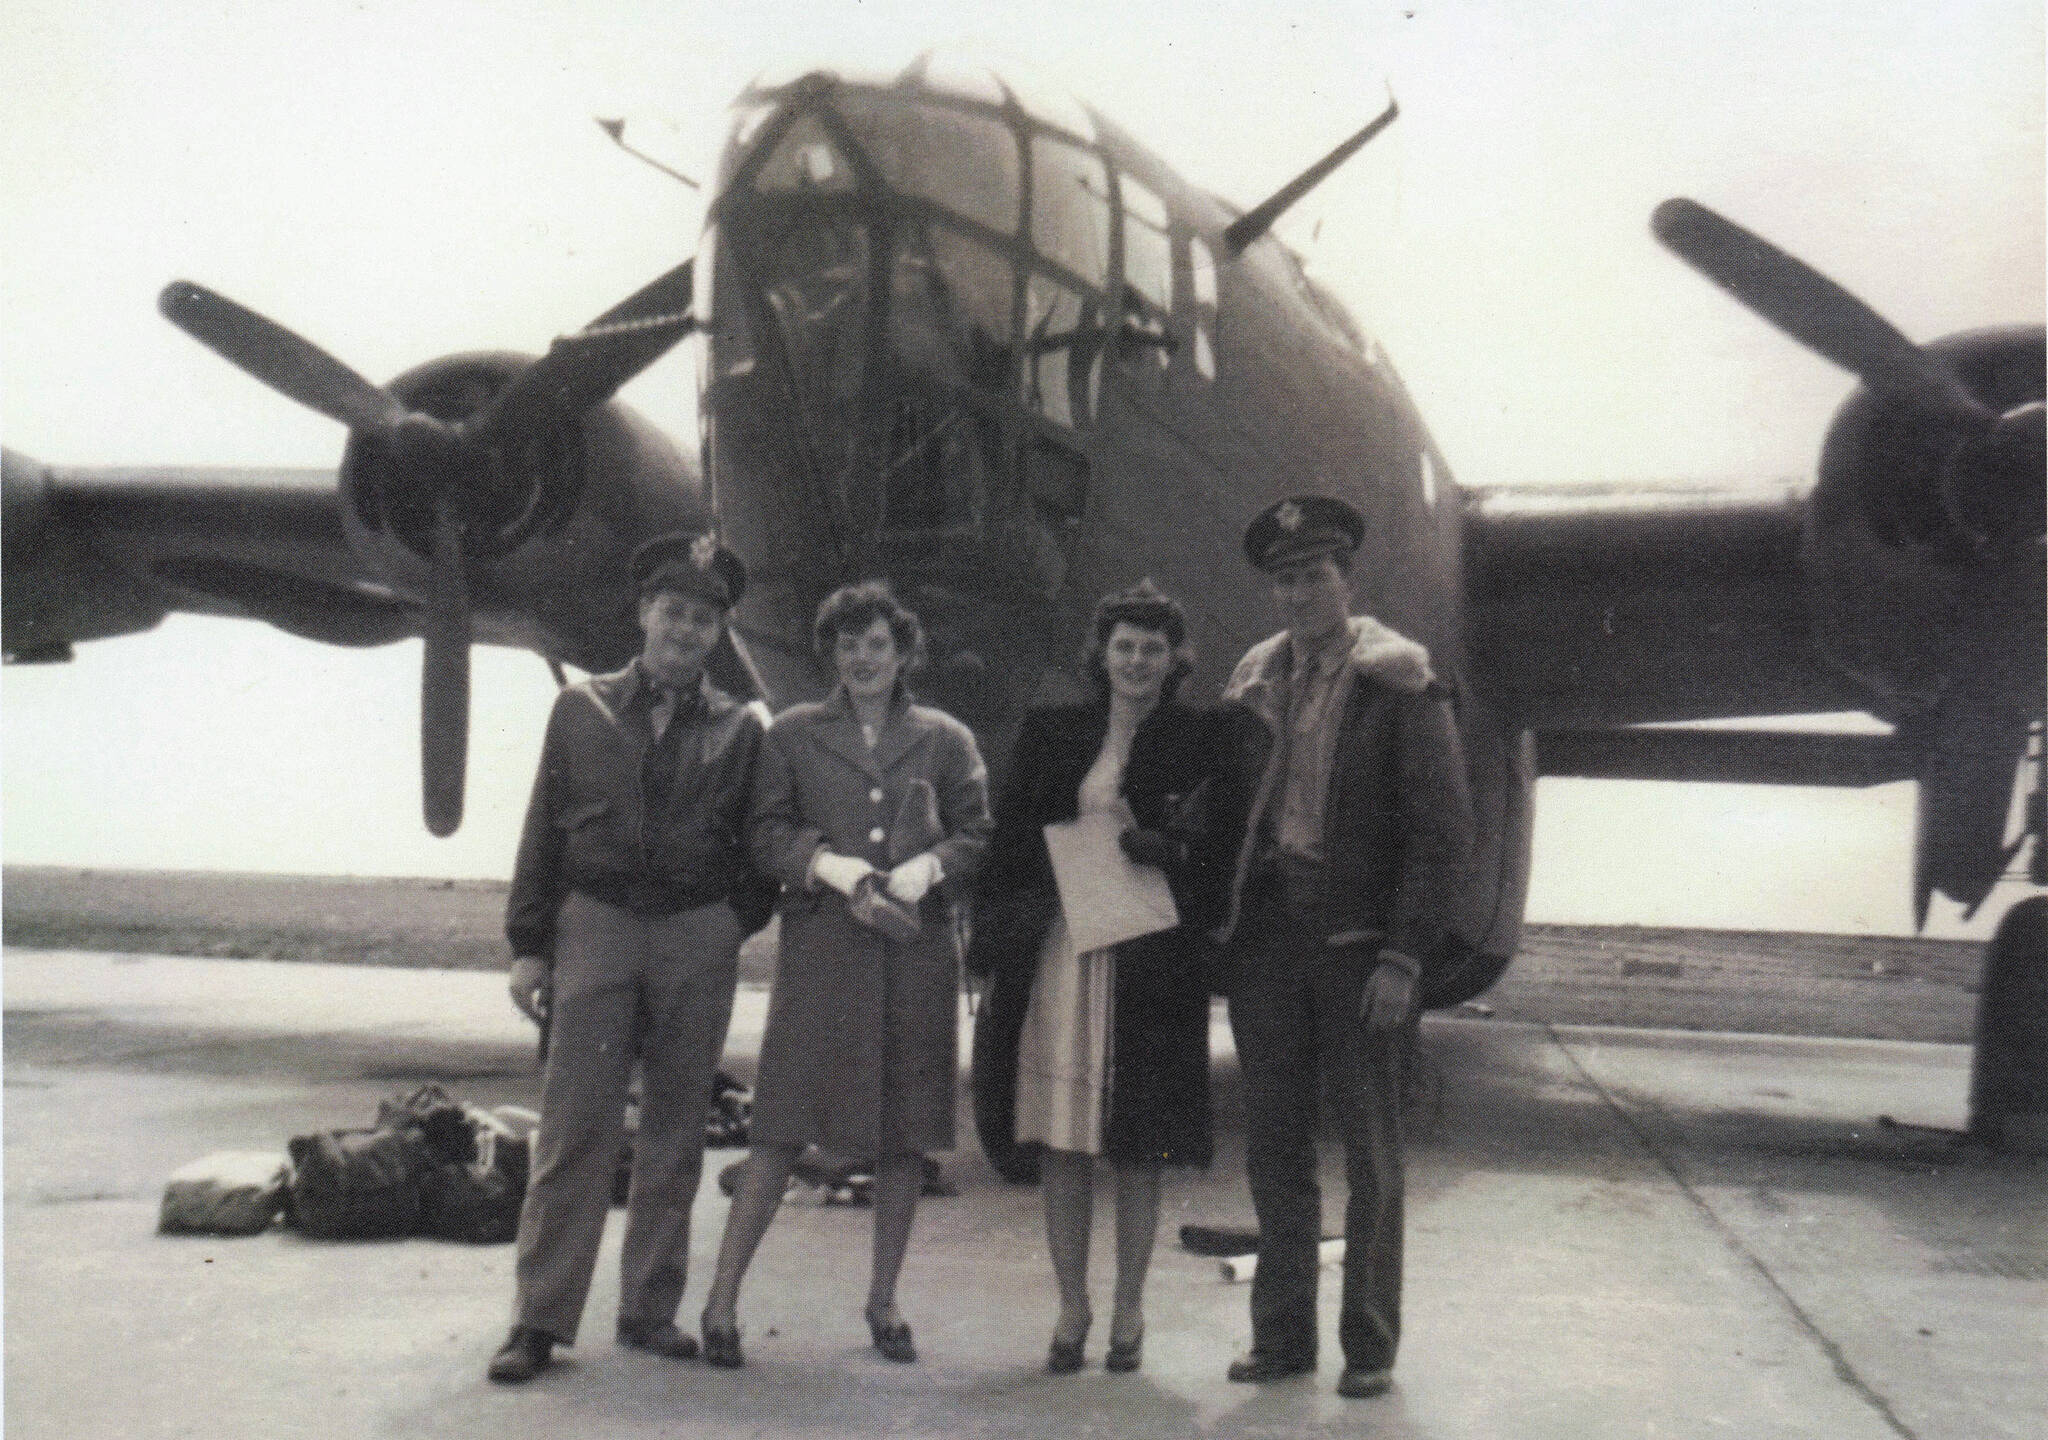 Photo courtesy of the Lancashire Family Collection
Larry and Rusty Lancashire (at left) pose in front of a B-24 bomber in the early 1940s with another unidentified couple. Larry was a B-24 co-pilot during World War II.